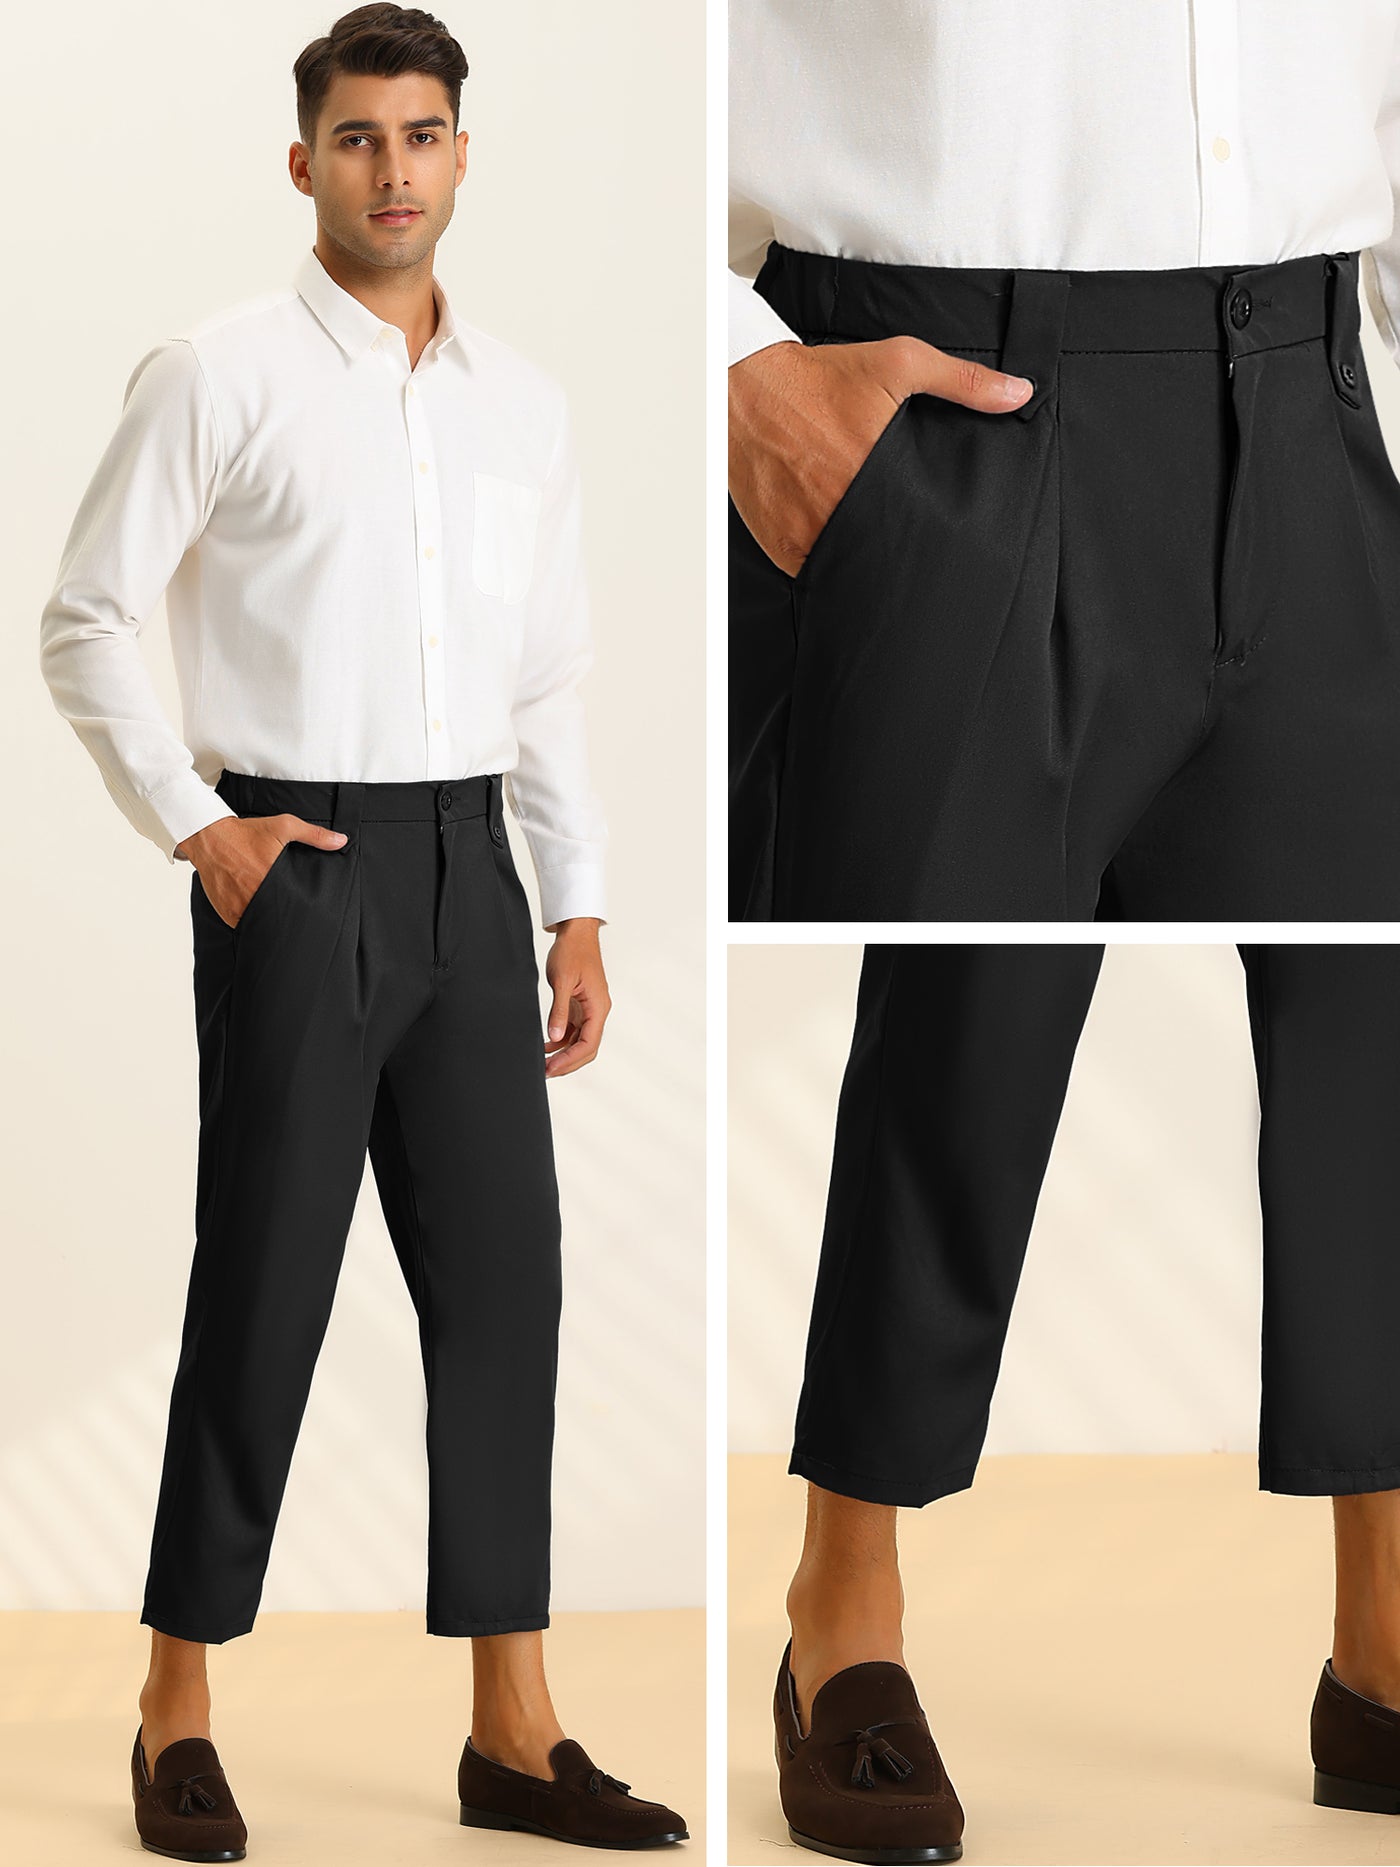 Bublédon Men's Cropped Pants Slim Fit Business Tapered Trousers